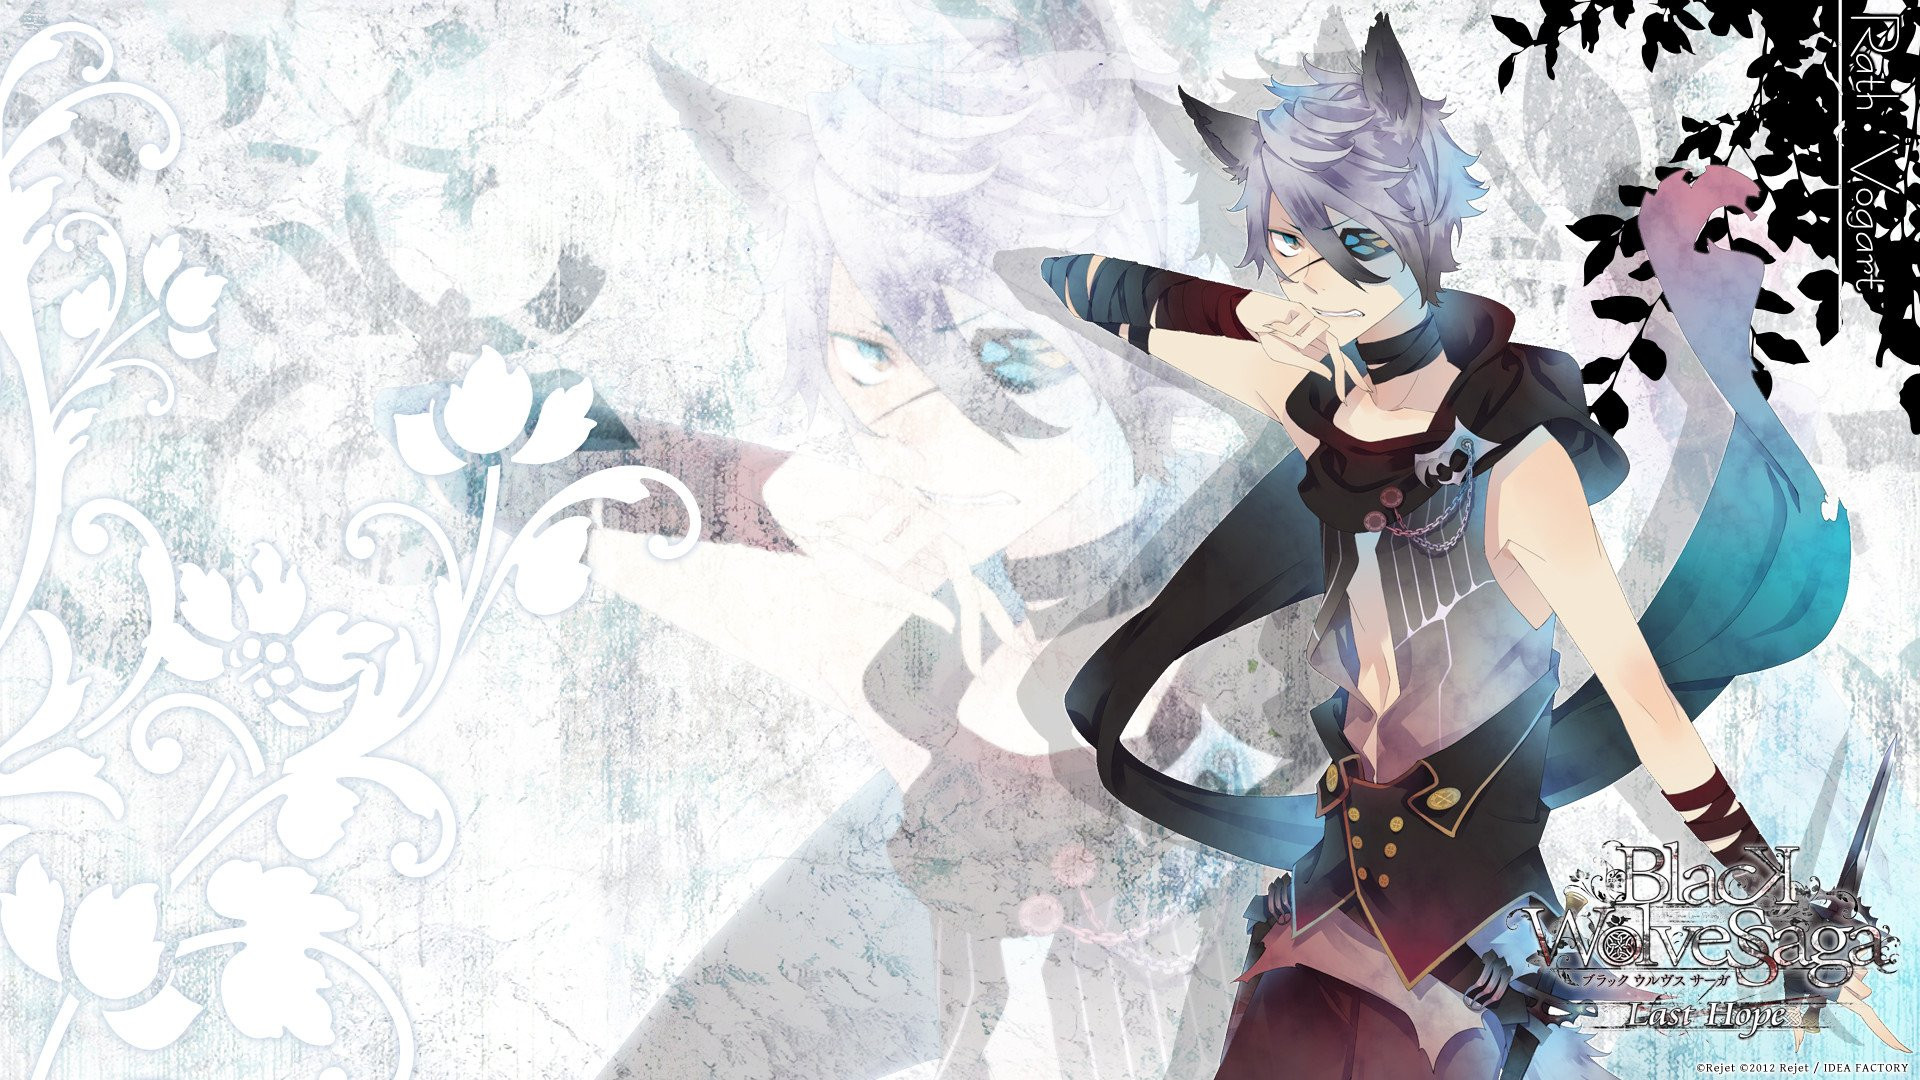 Anime Wolf Wallpapers